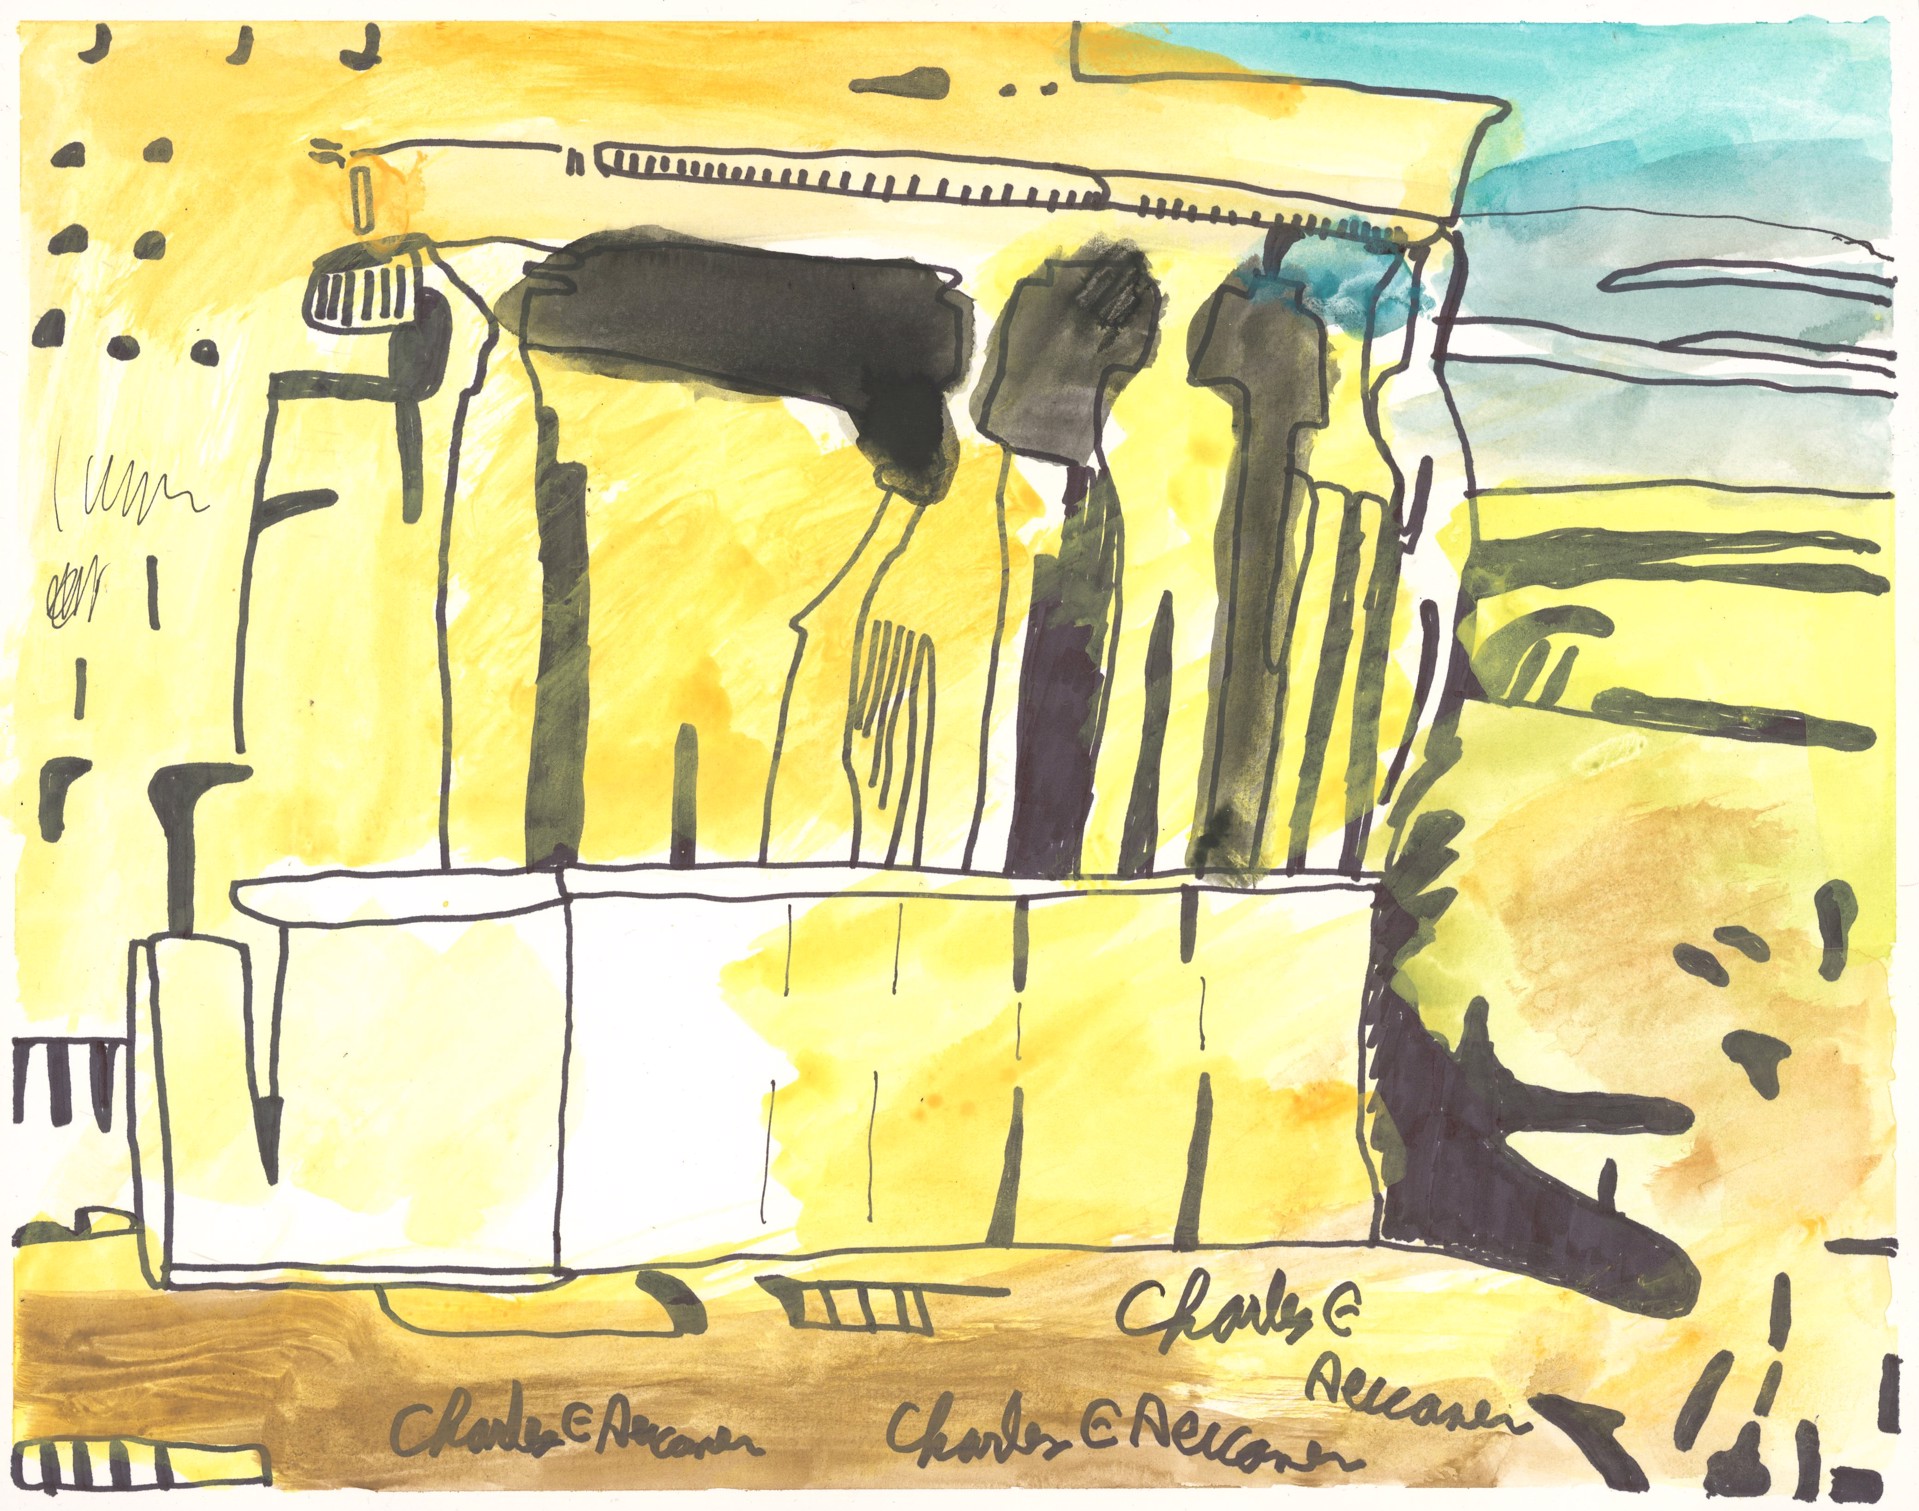 Temple of Athena 1 by Charles Meissner